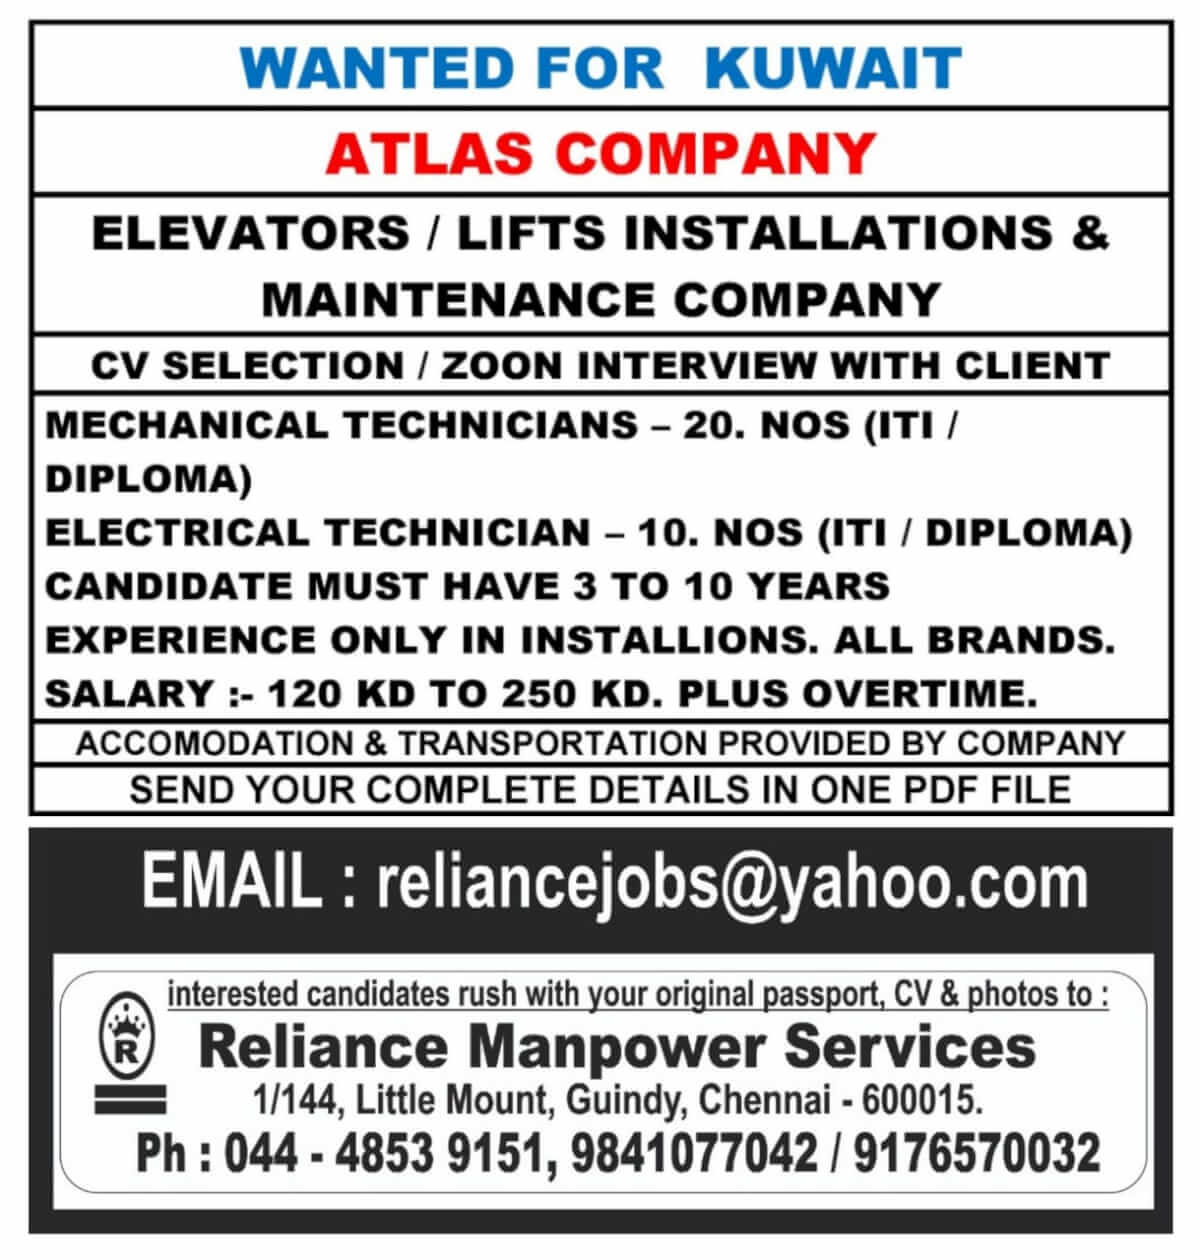 WANTED FOR KUWAIT